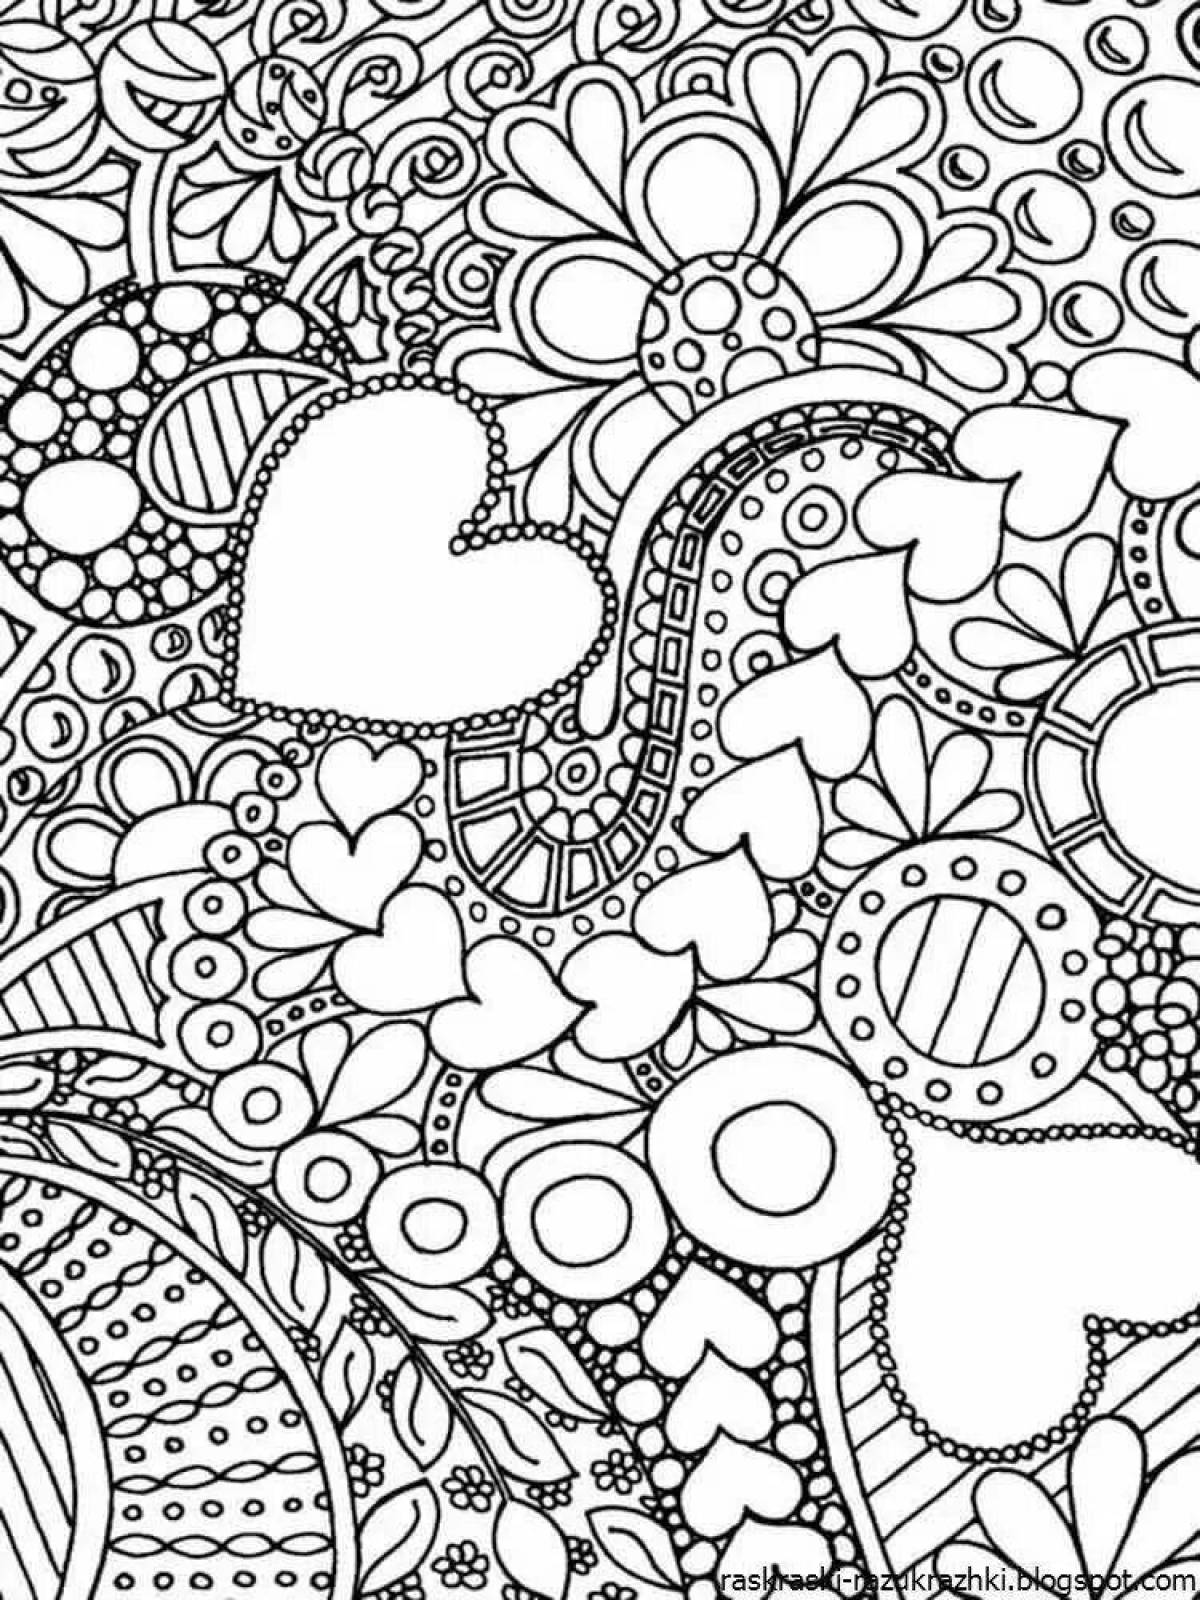 Color Explosion coloring book for 12-13 year olds